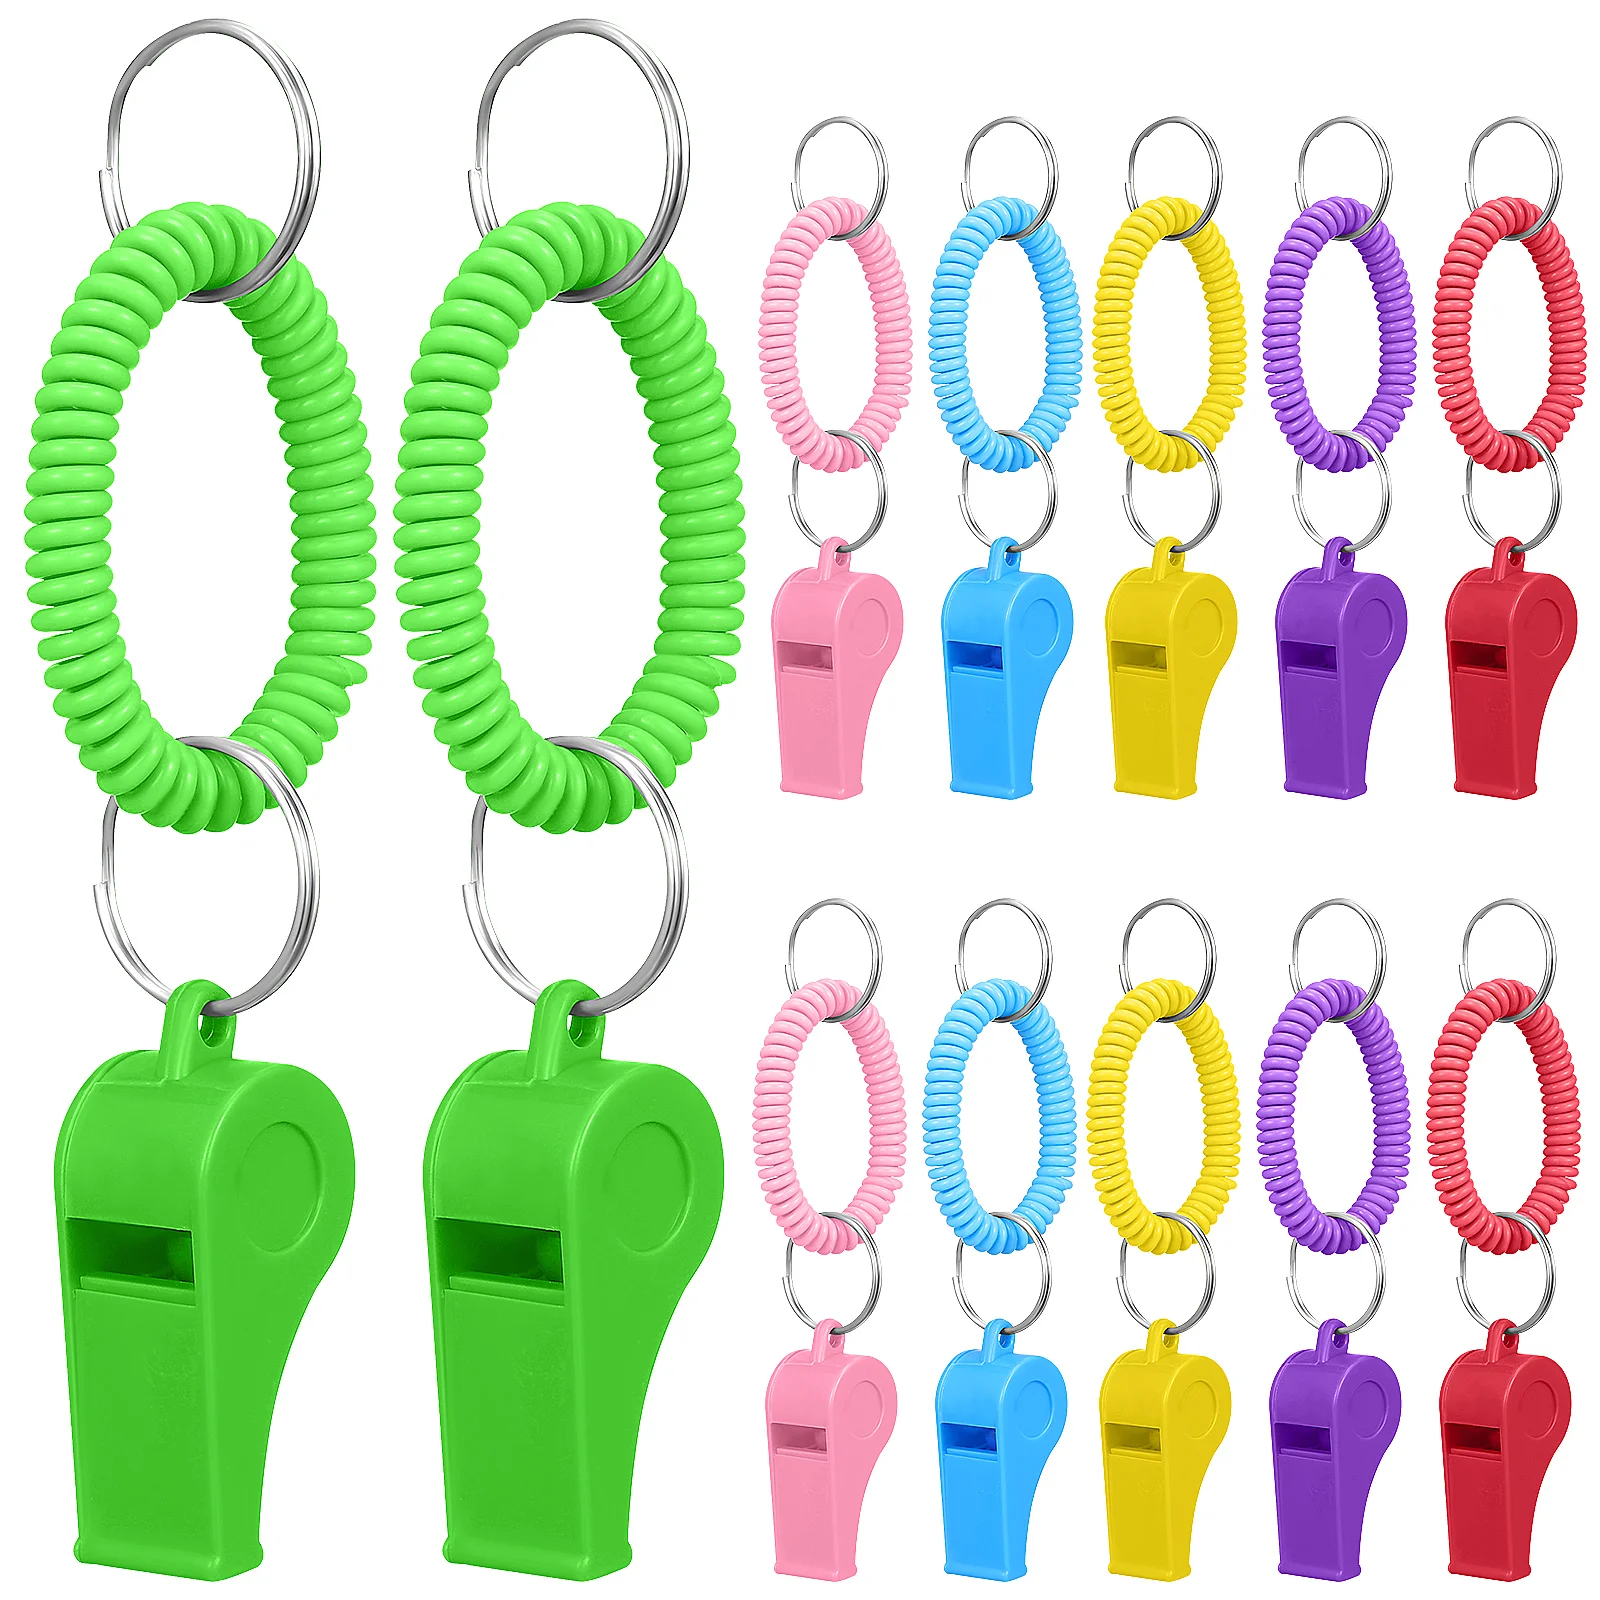 12 Pcs Plastic Whistle Outdoor Toys Lifeguards Coaches Emergency Sports for Pendant Child Decor 1 pc new plastic pealess finger grip sports referee whistle